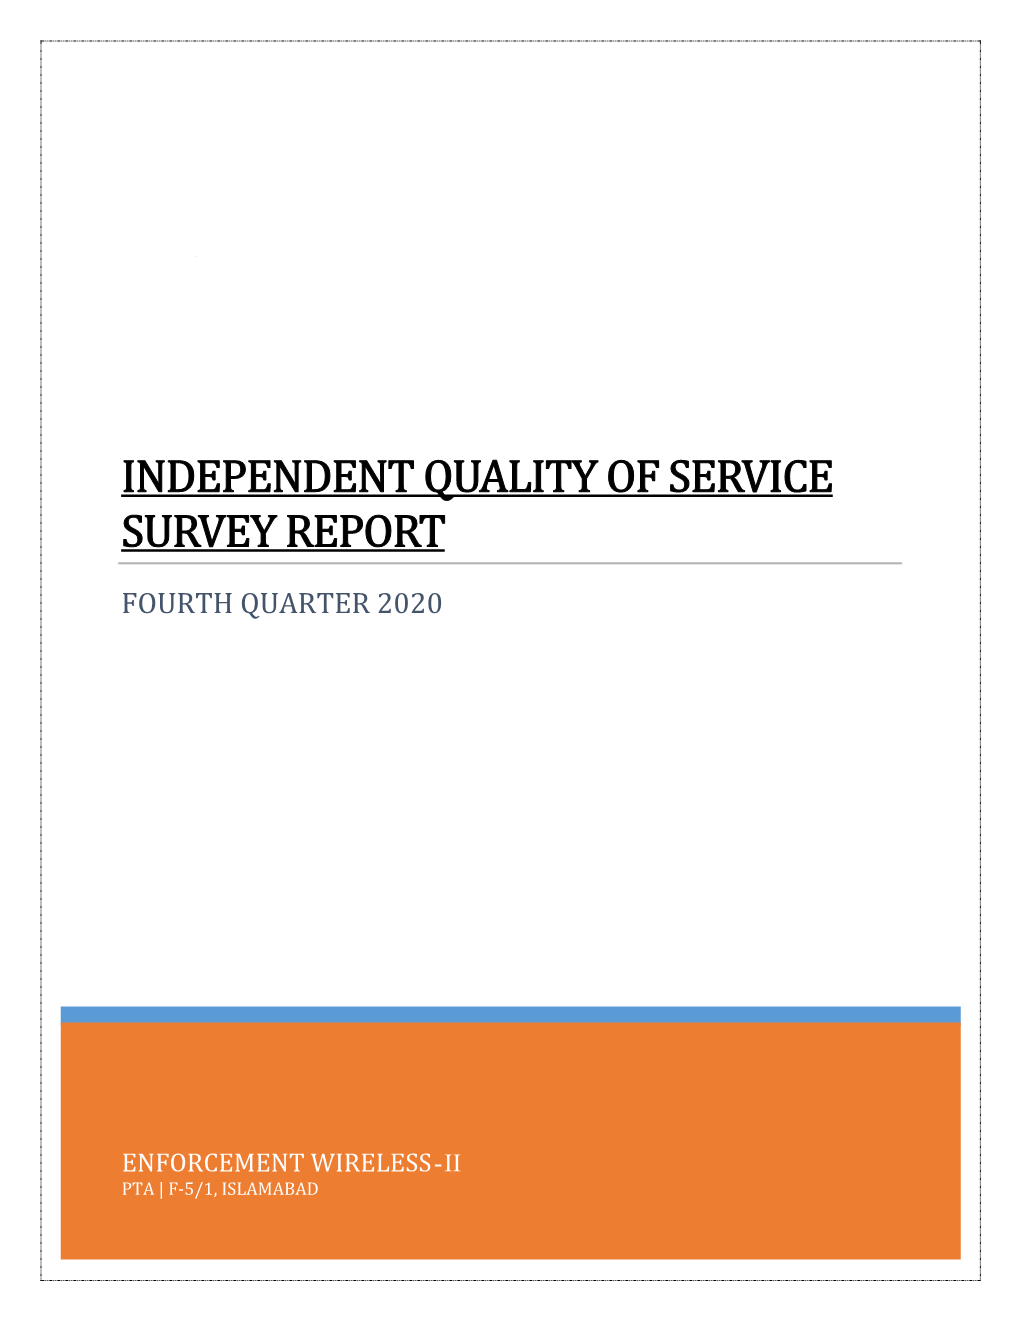 Independent Quality of Service Survey Report Fourth Quarter 2020